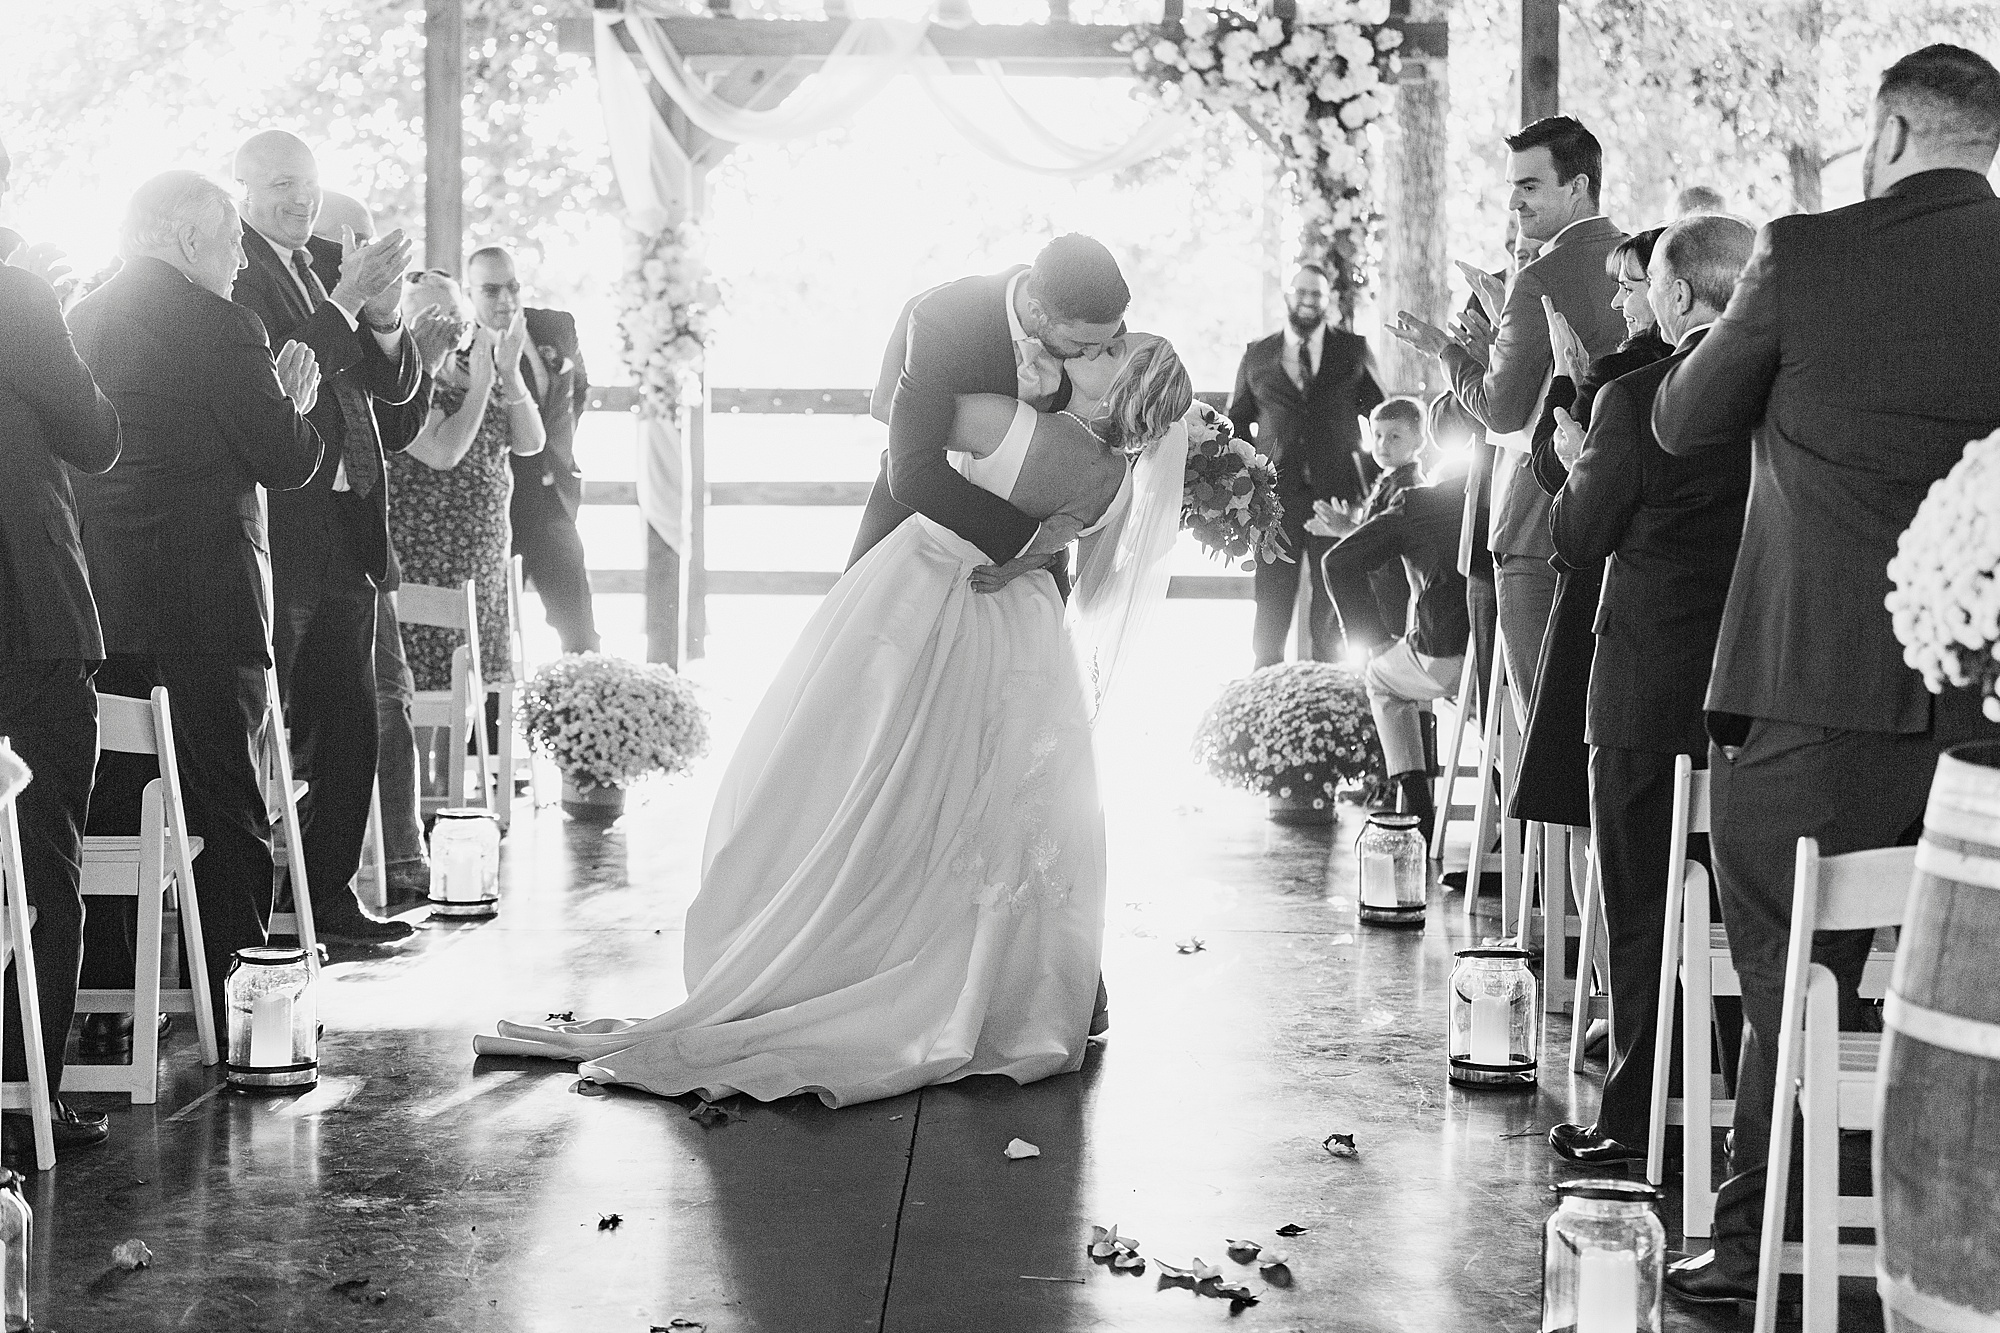 bride and groom kiss after wedding ceremony in aisle